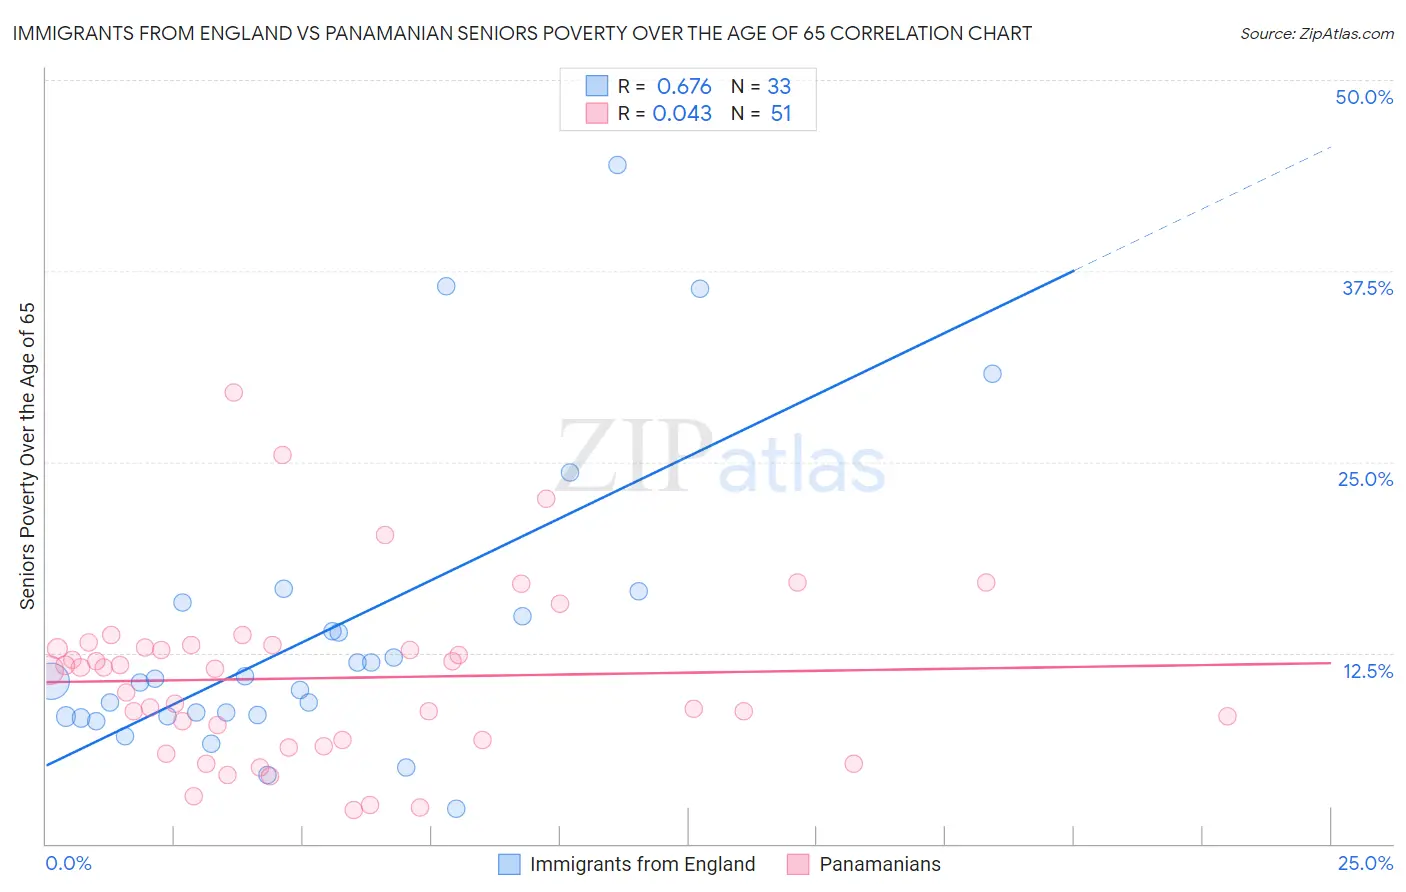 Immigrants from England vs Panamanian Seniors Poverty Over the Age of 65